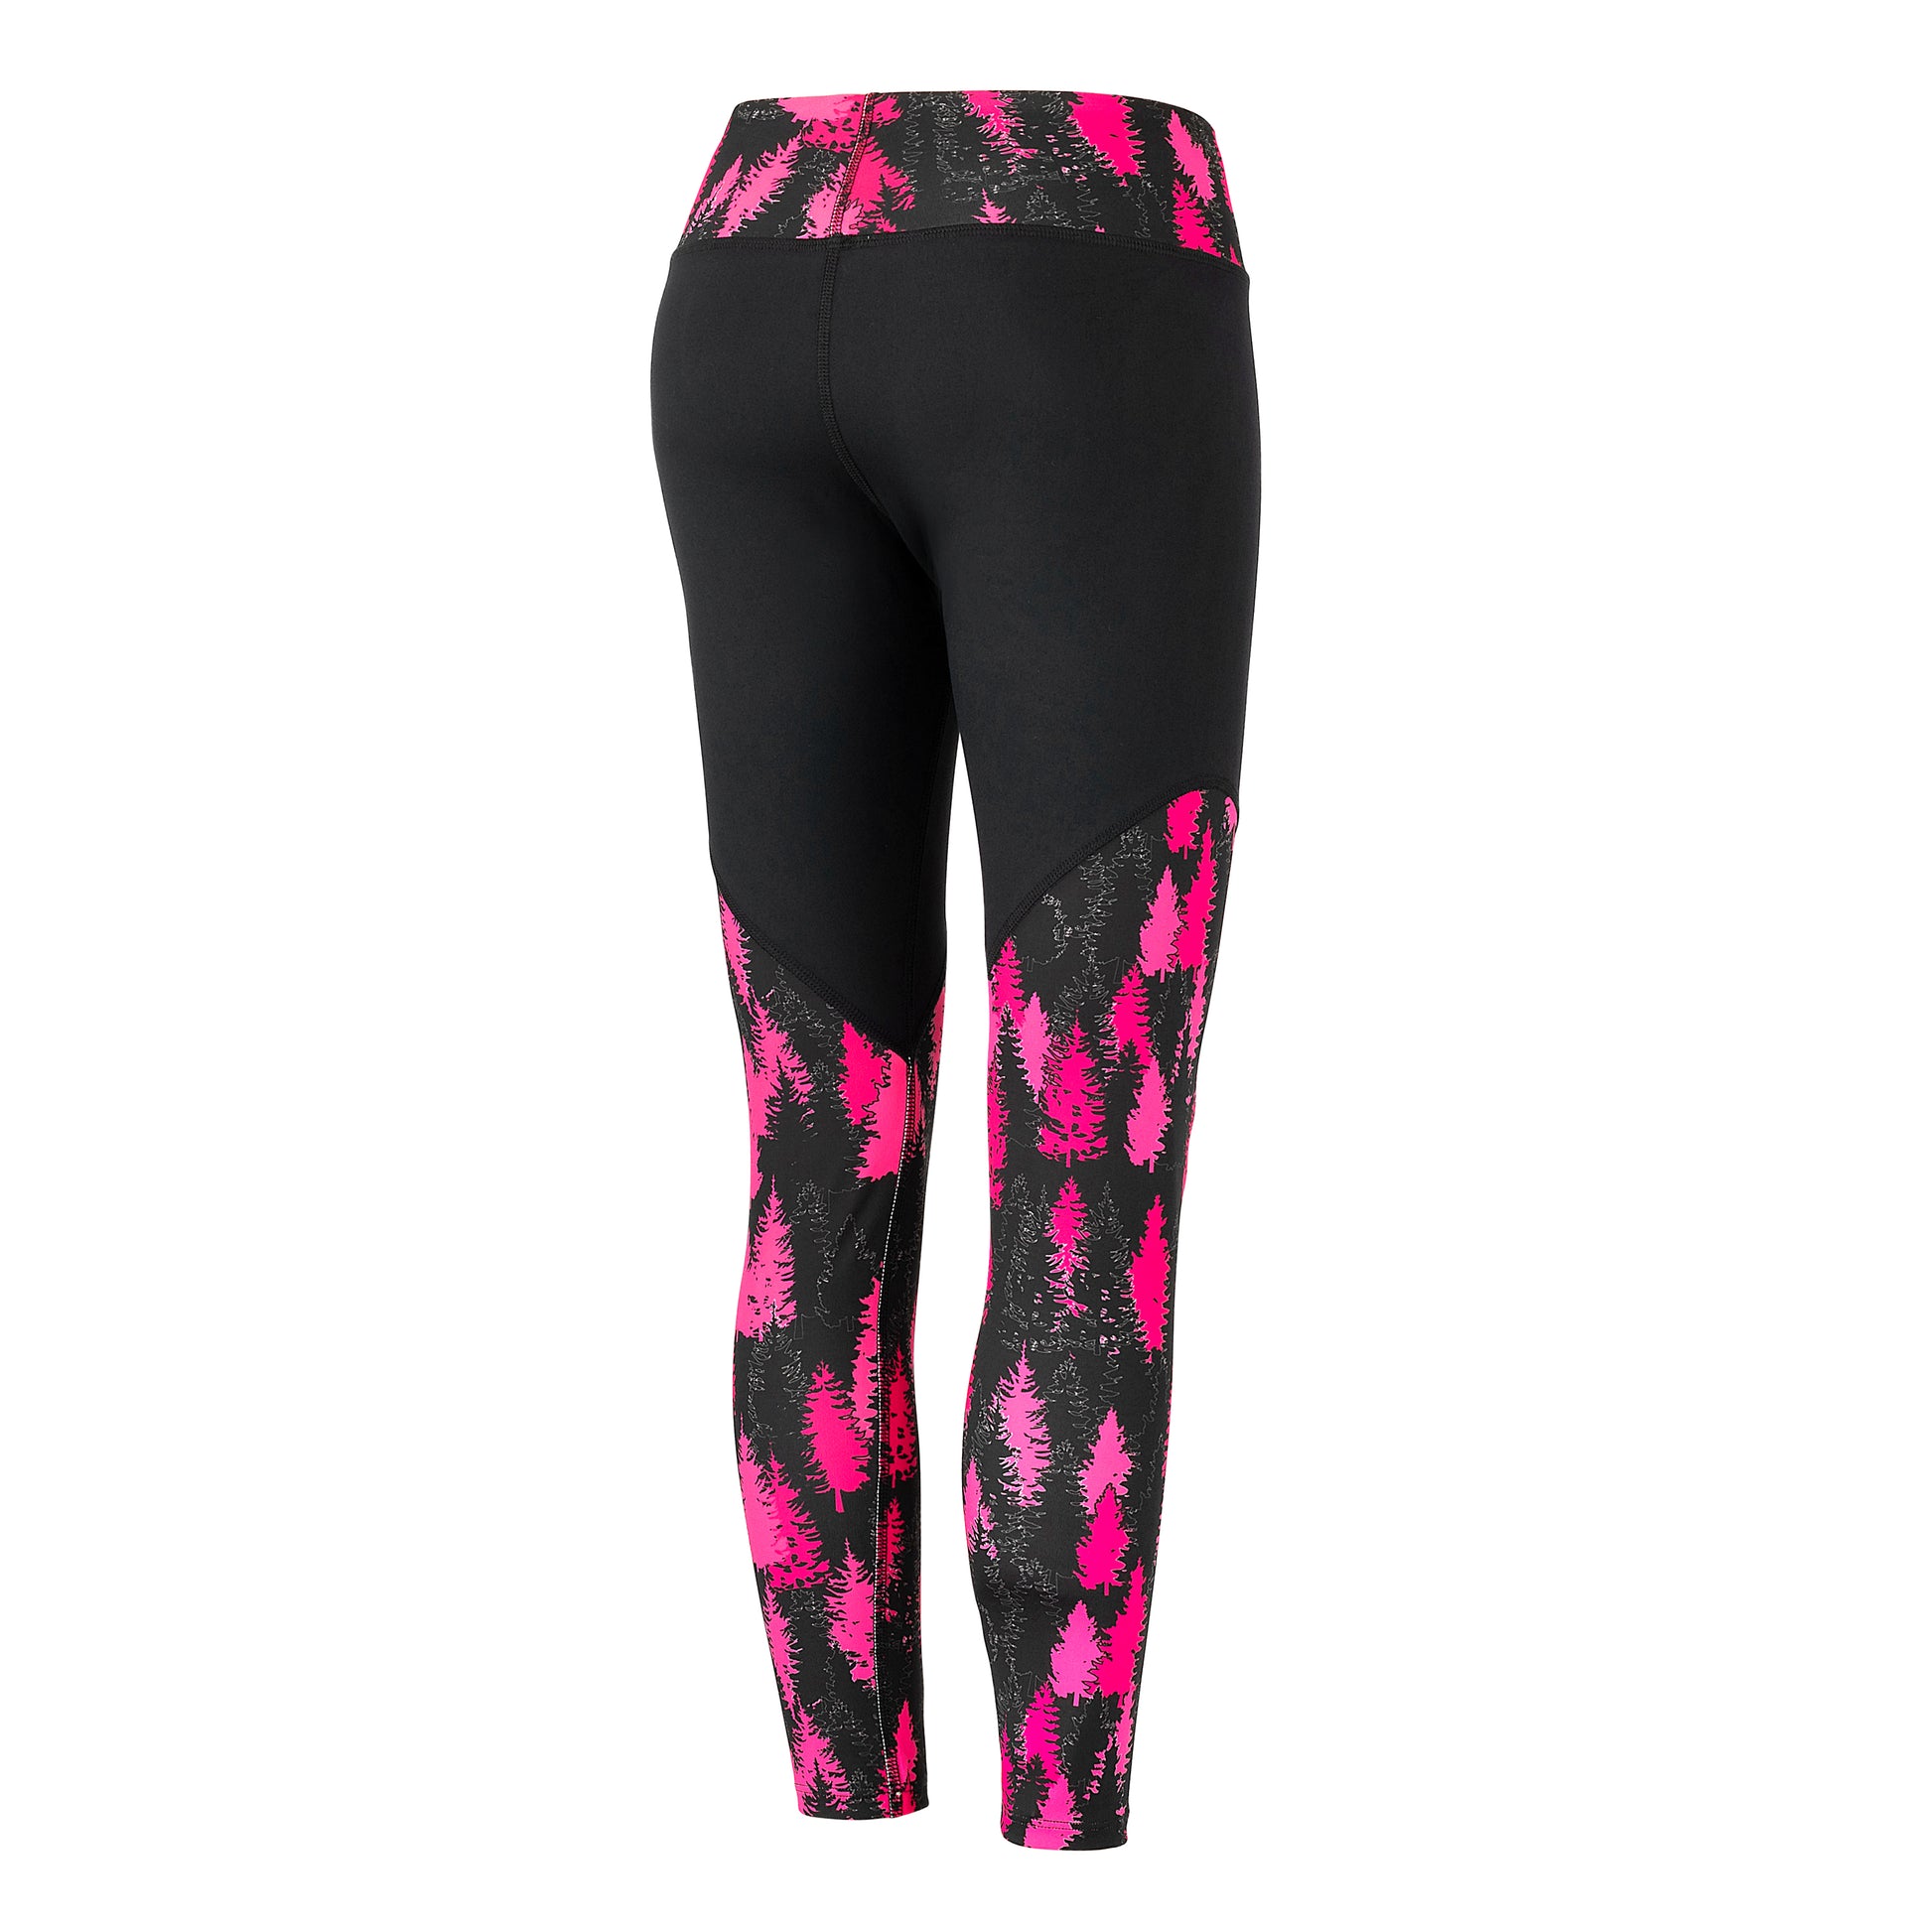 Made in USA 7/8 Pink and Black Aspen Leggings. Crafted with care from a premium blend of materials. With a mid to high-rise waist, they provide just the right amount of coverage and support. The 7/8 length design adds a trendy touch to your look. These leggings feature a hot pink color scheme graphic pine tree pattern. Back View.